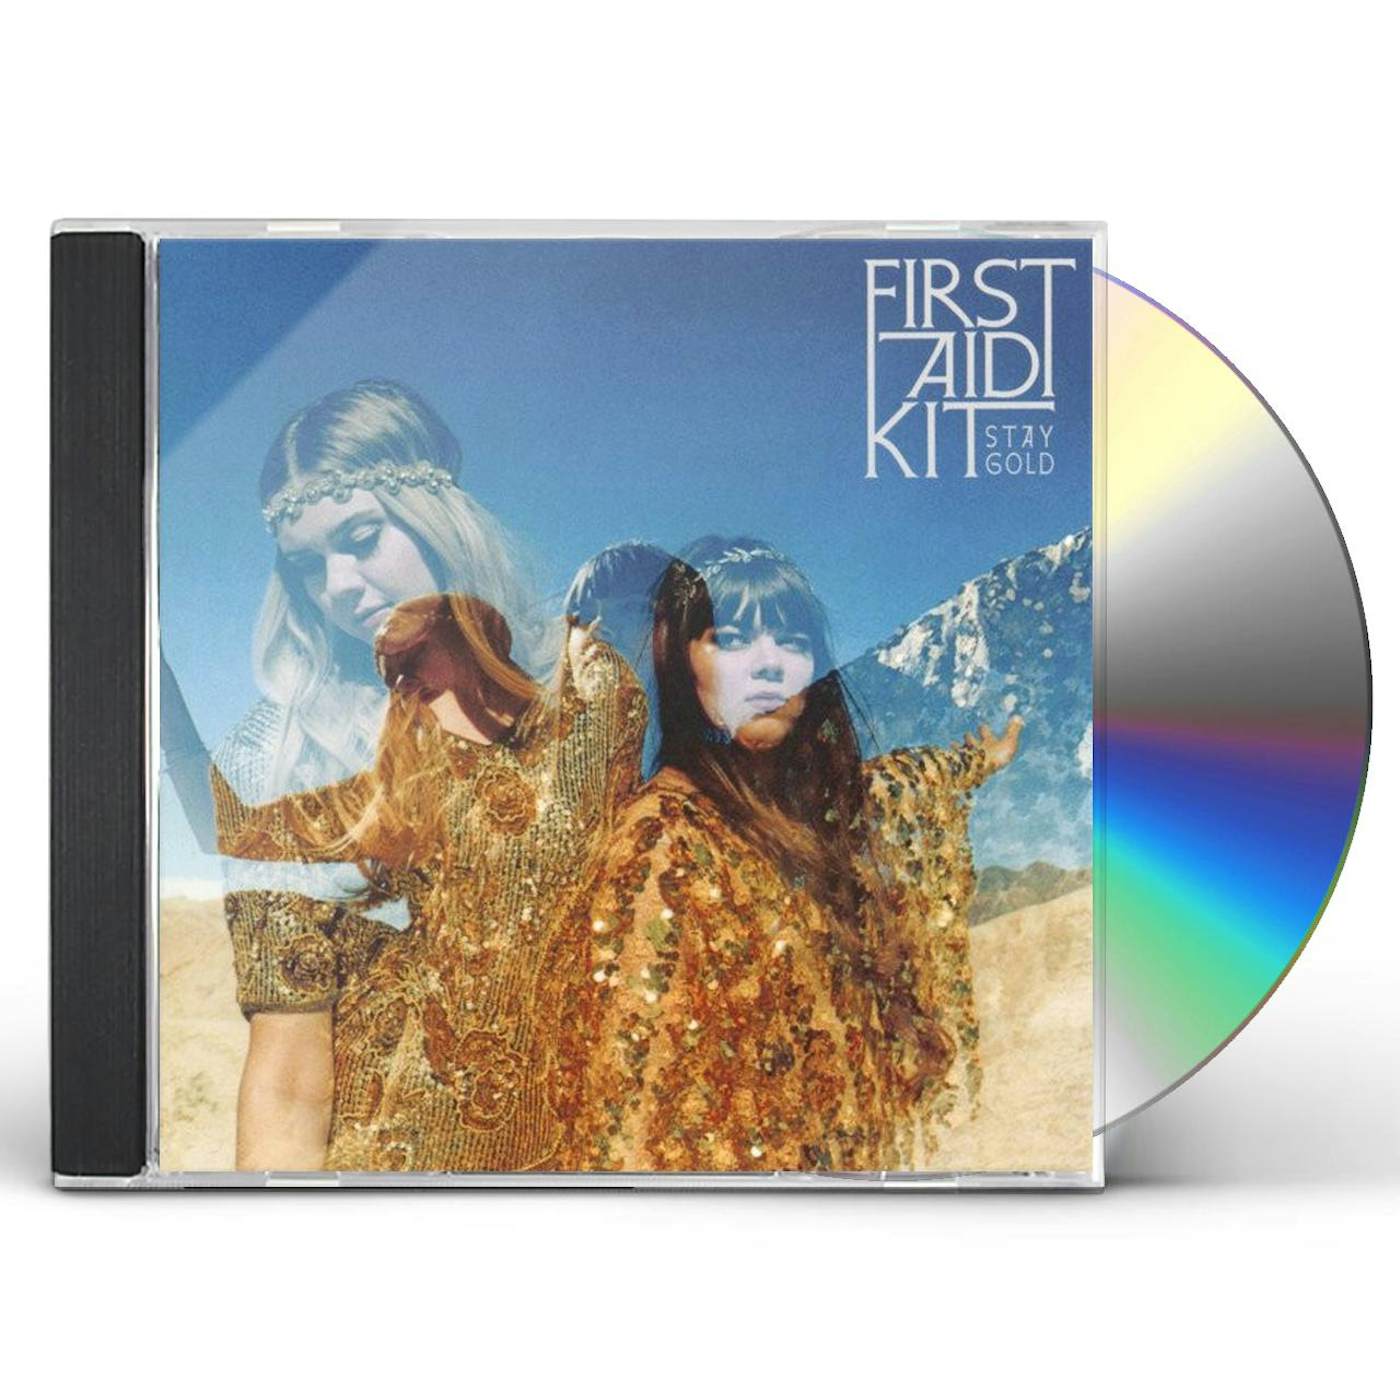 First Aid Kit STAY GOLD CD